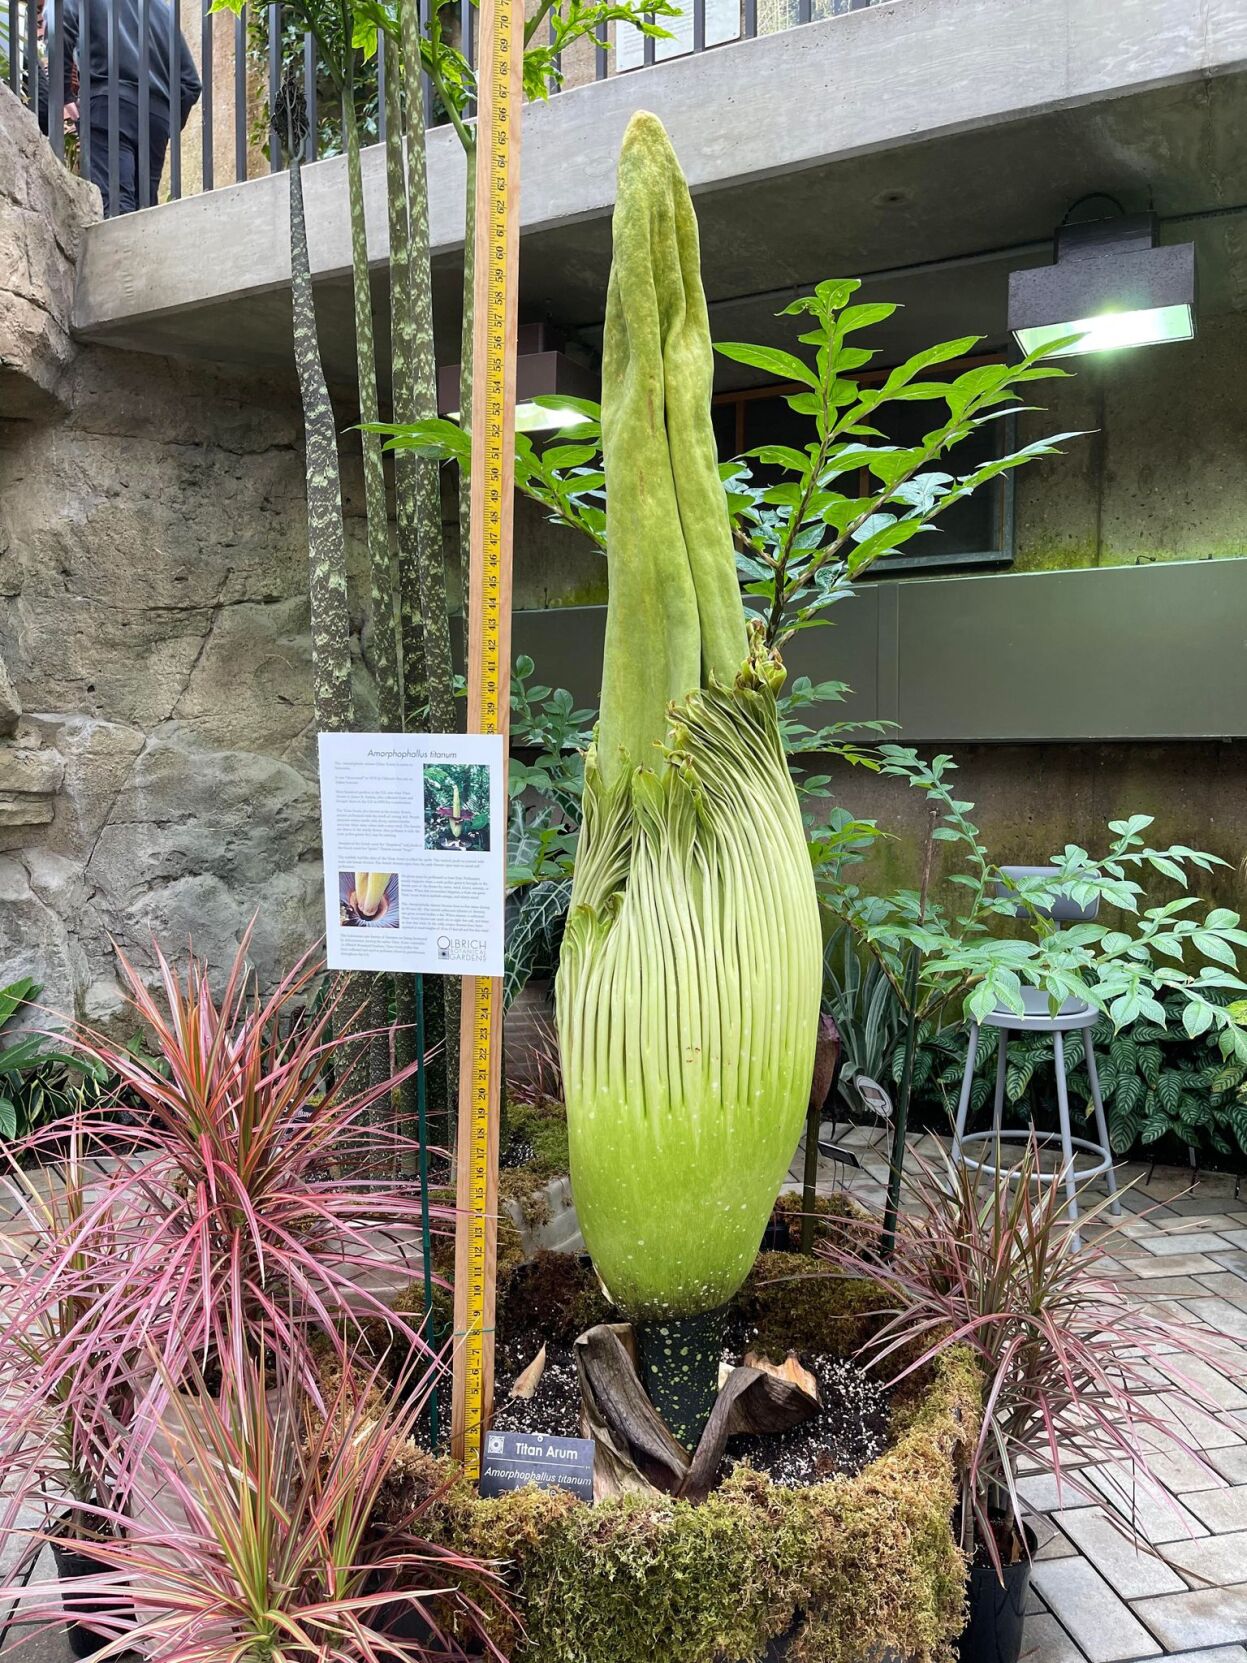 5 seeds Corpse flower biggest flower,the Titan arum "Corpse flower"or"Corpse pla 